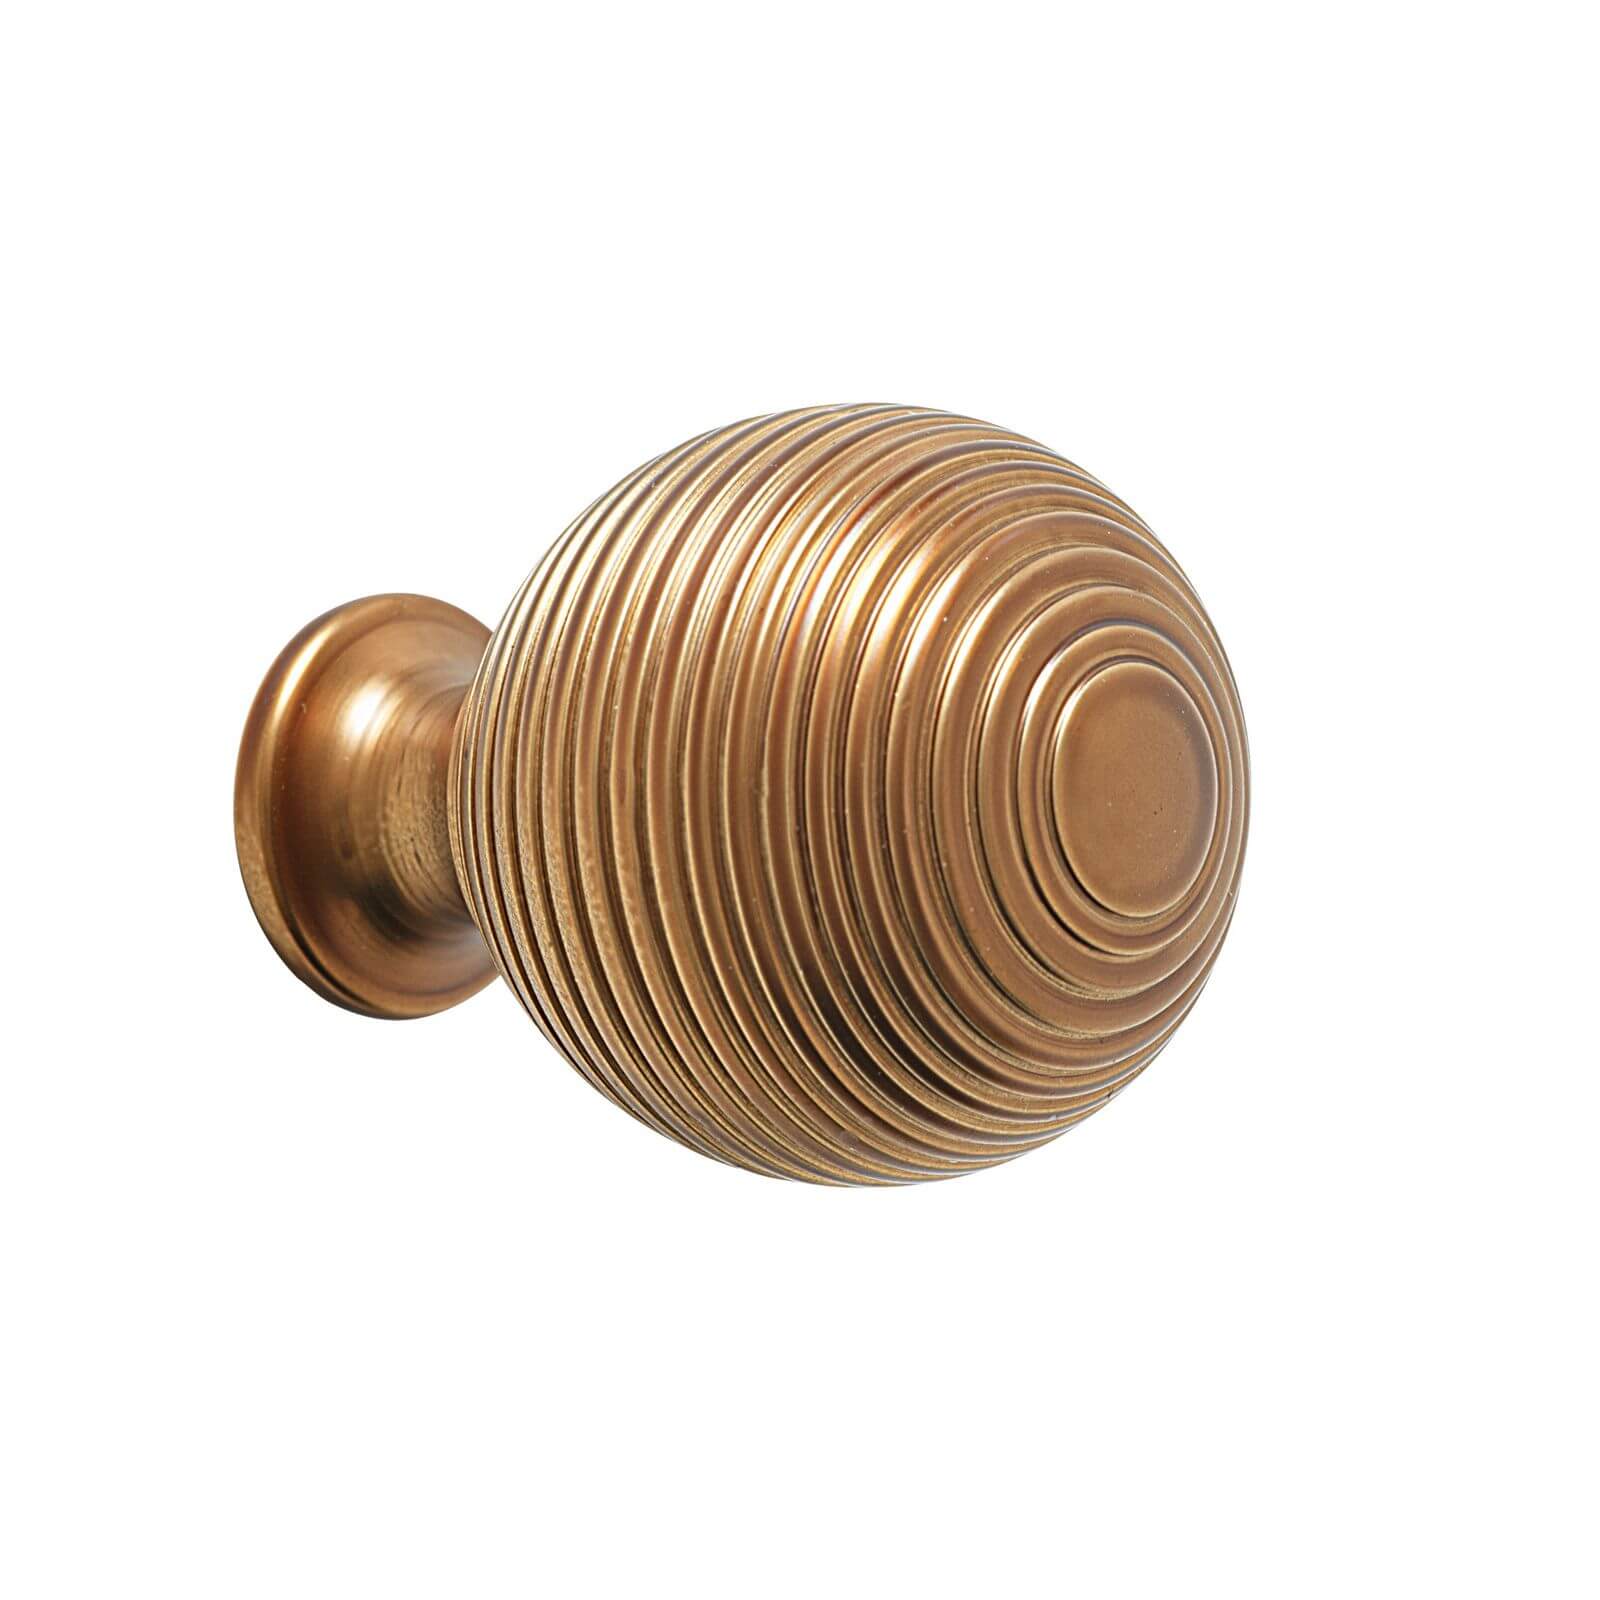 Reeded Solid Ball Knob Antique Brass